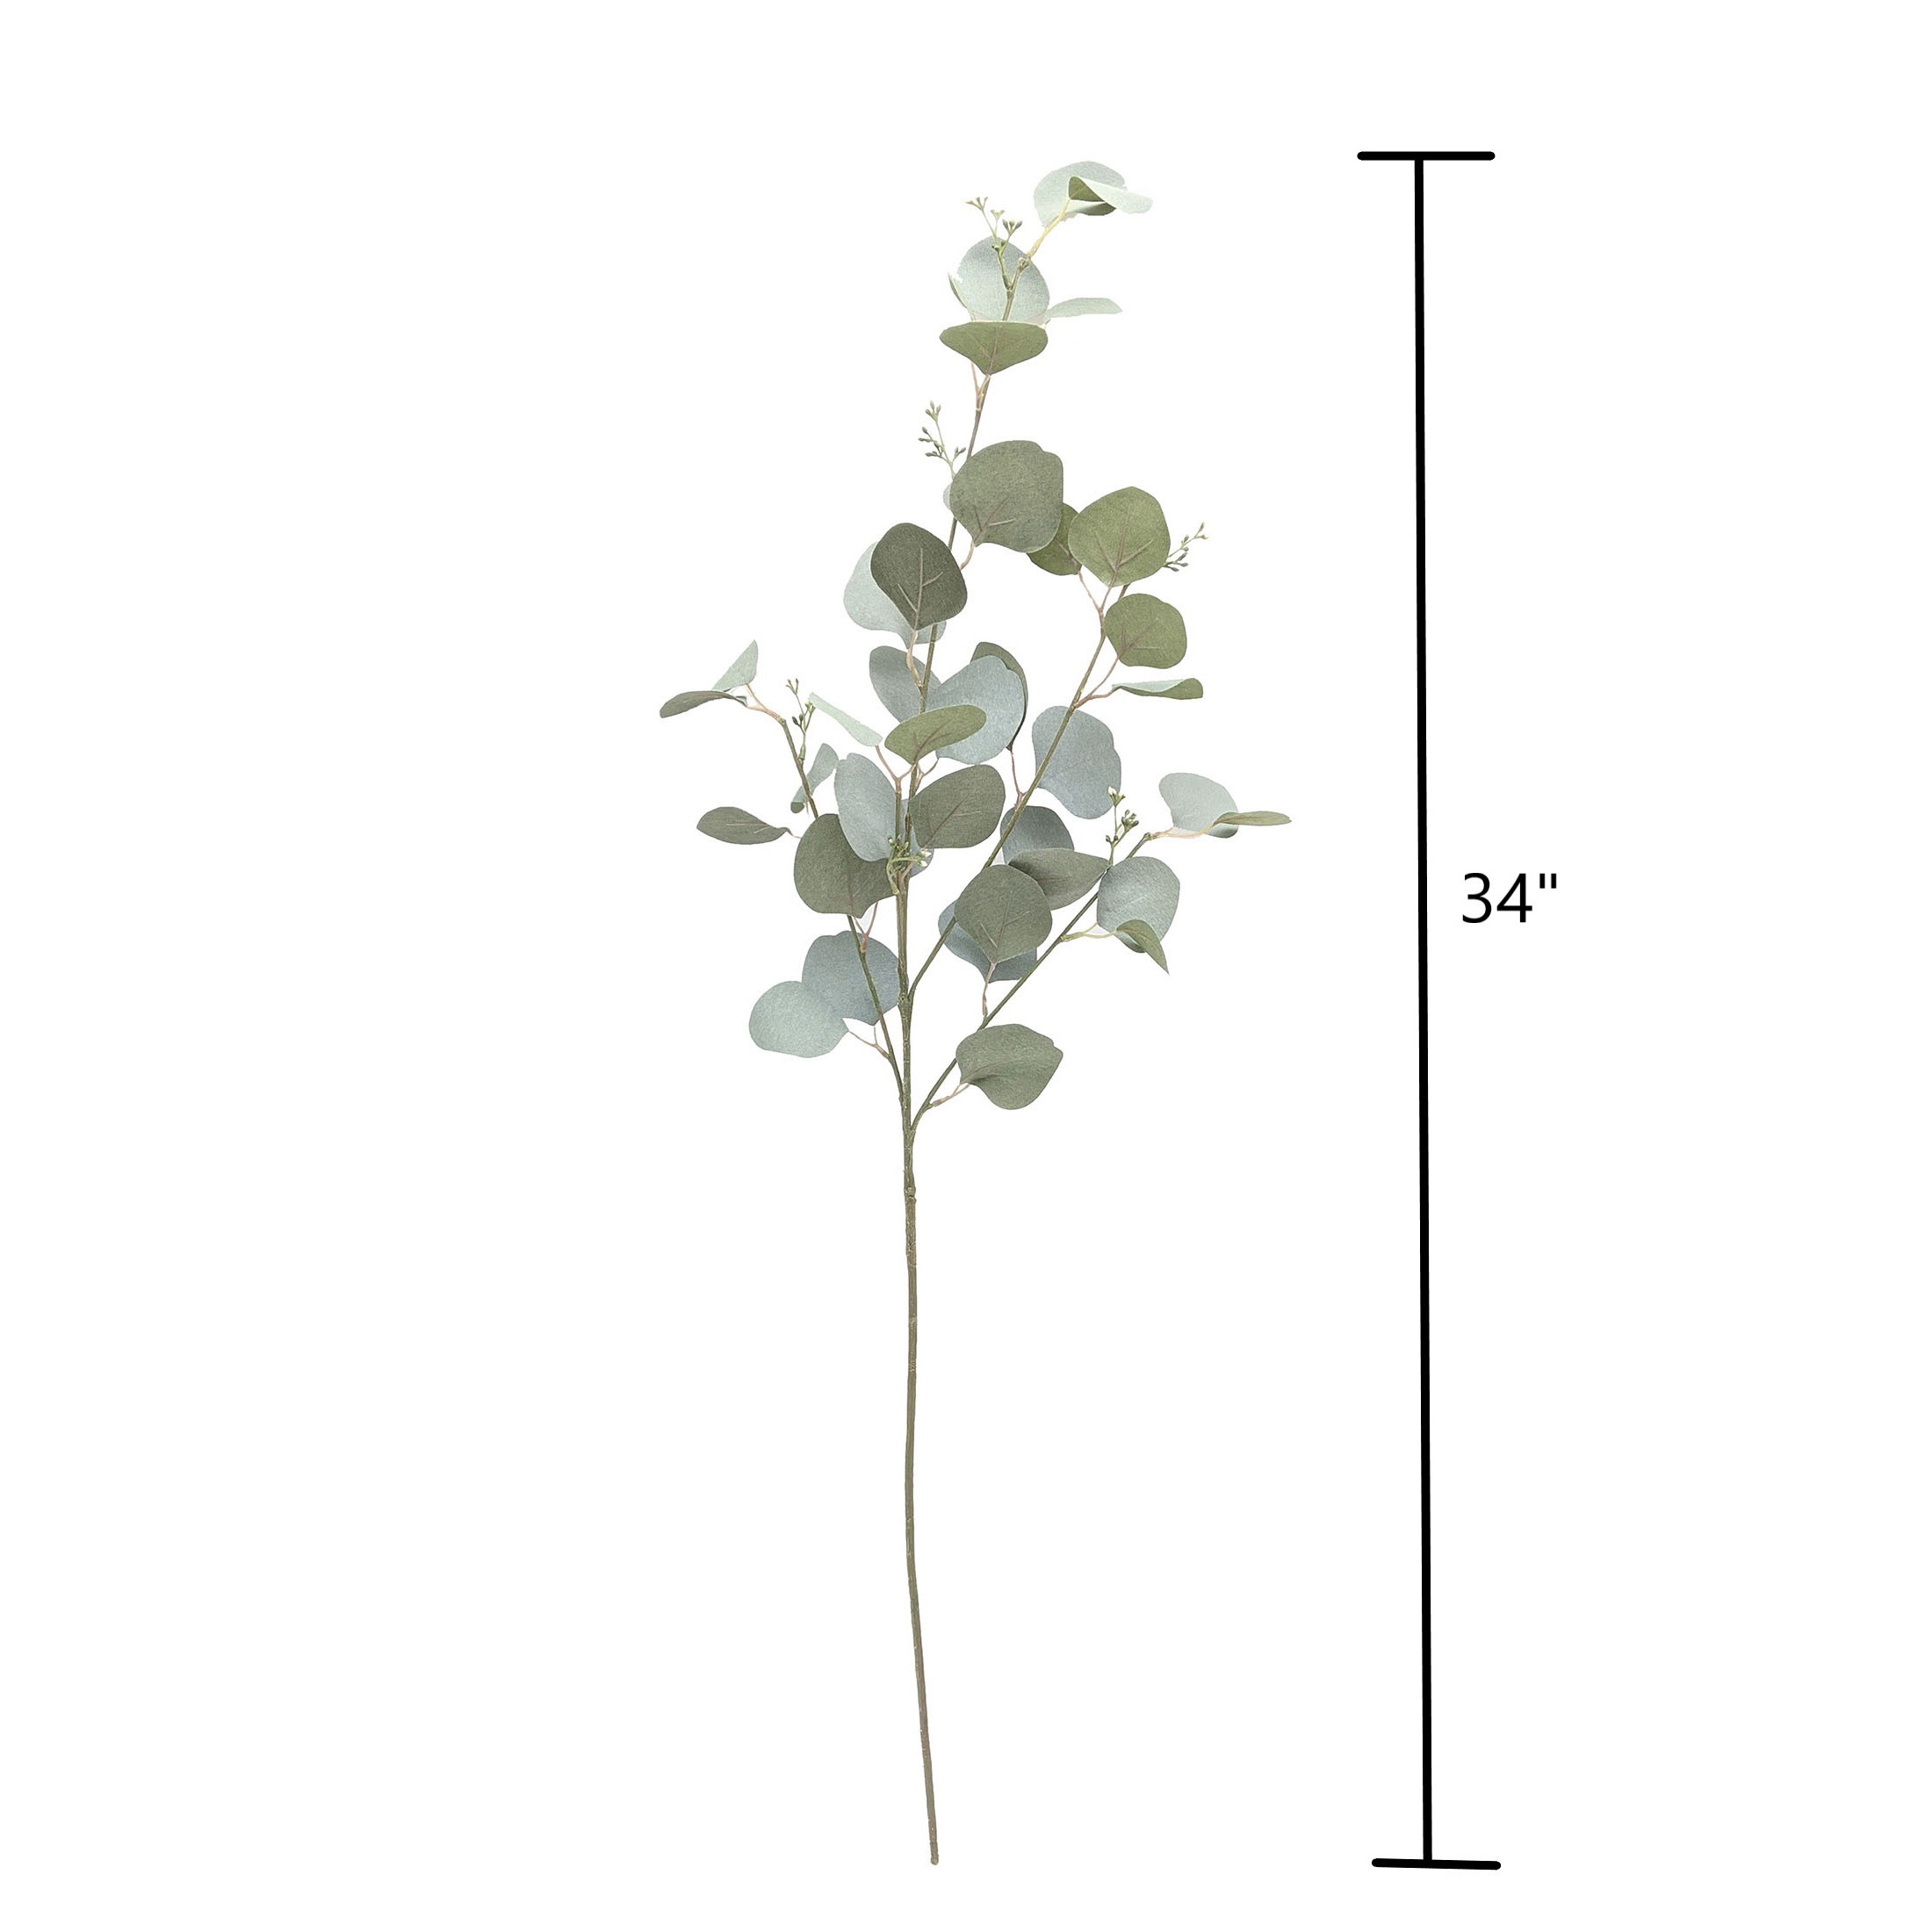 Mainstays Artificial Green Round Leaf Eucalyptus Stem, 34in Tall Floral Picks - image 4 of 5